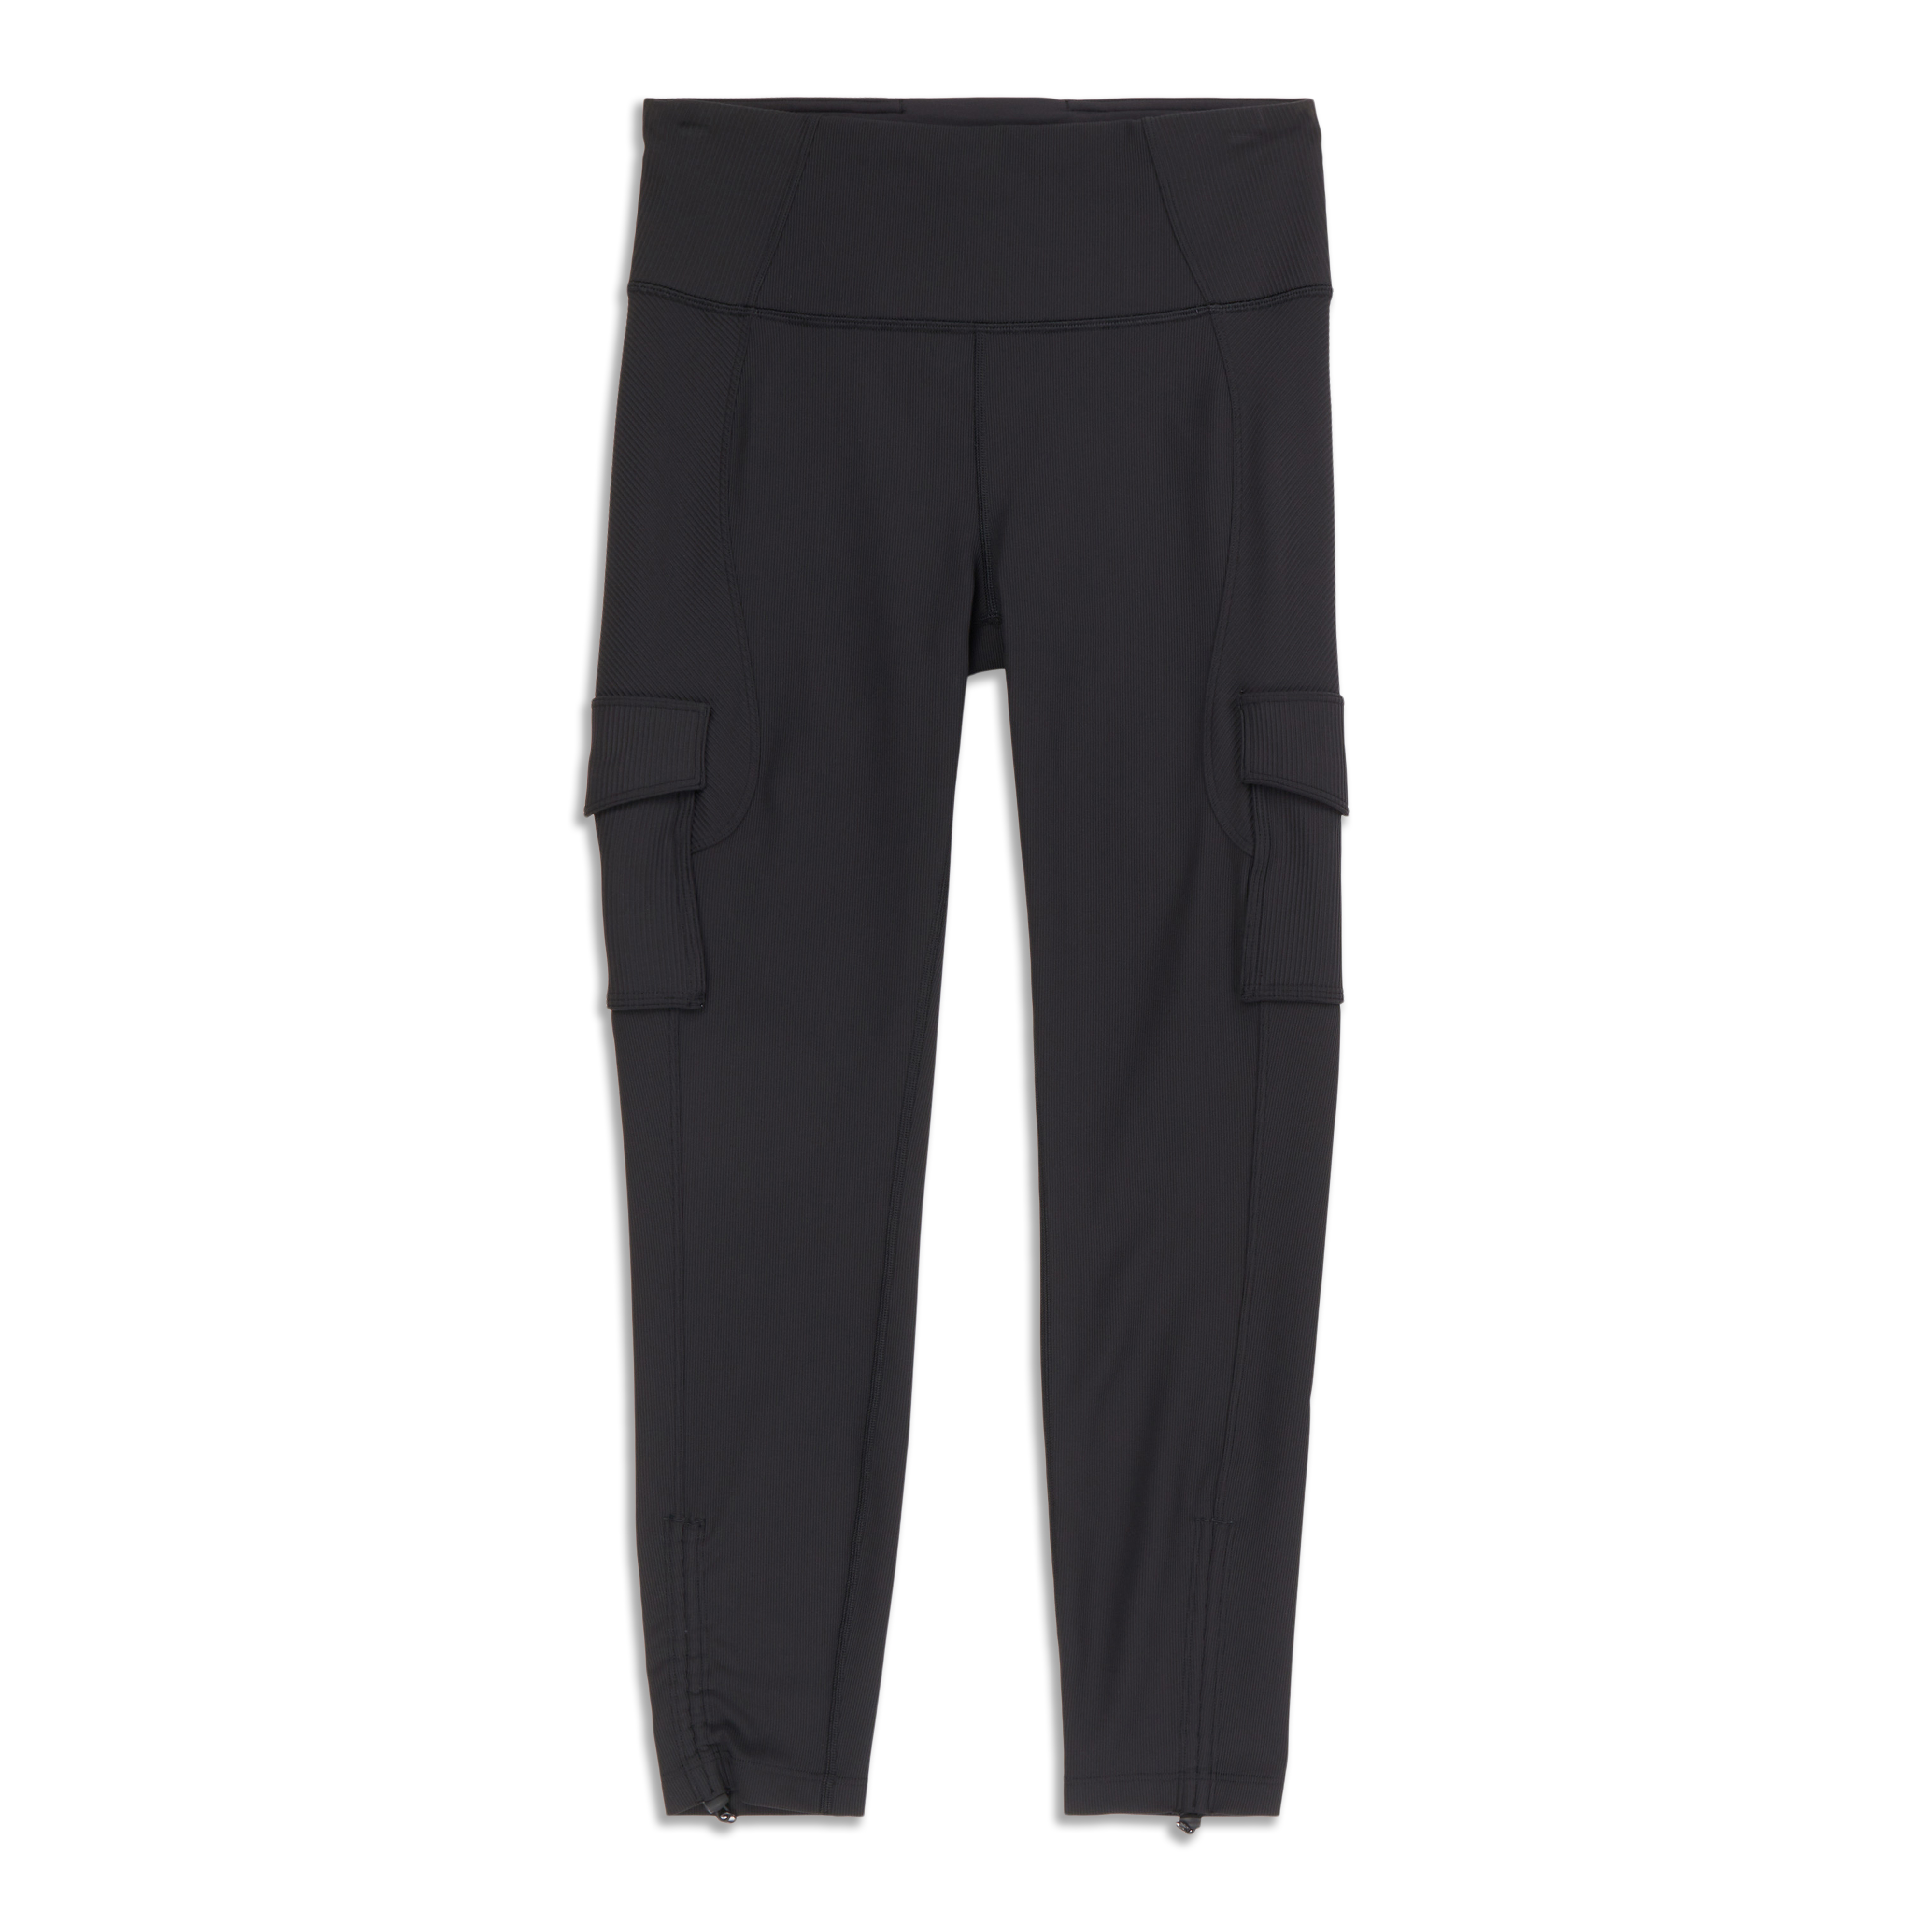 Keep Moving Pant 7/8 High-Rise - Resale